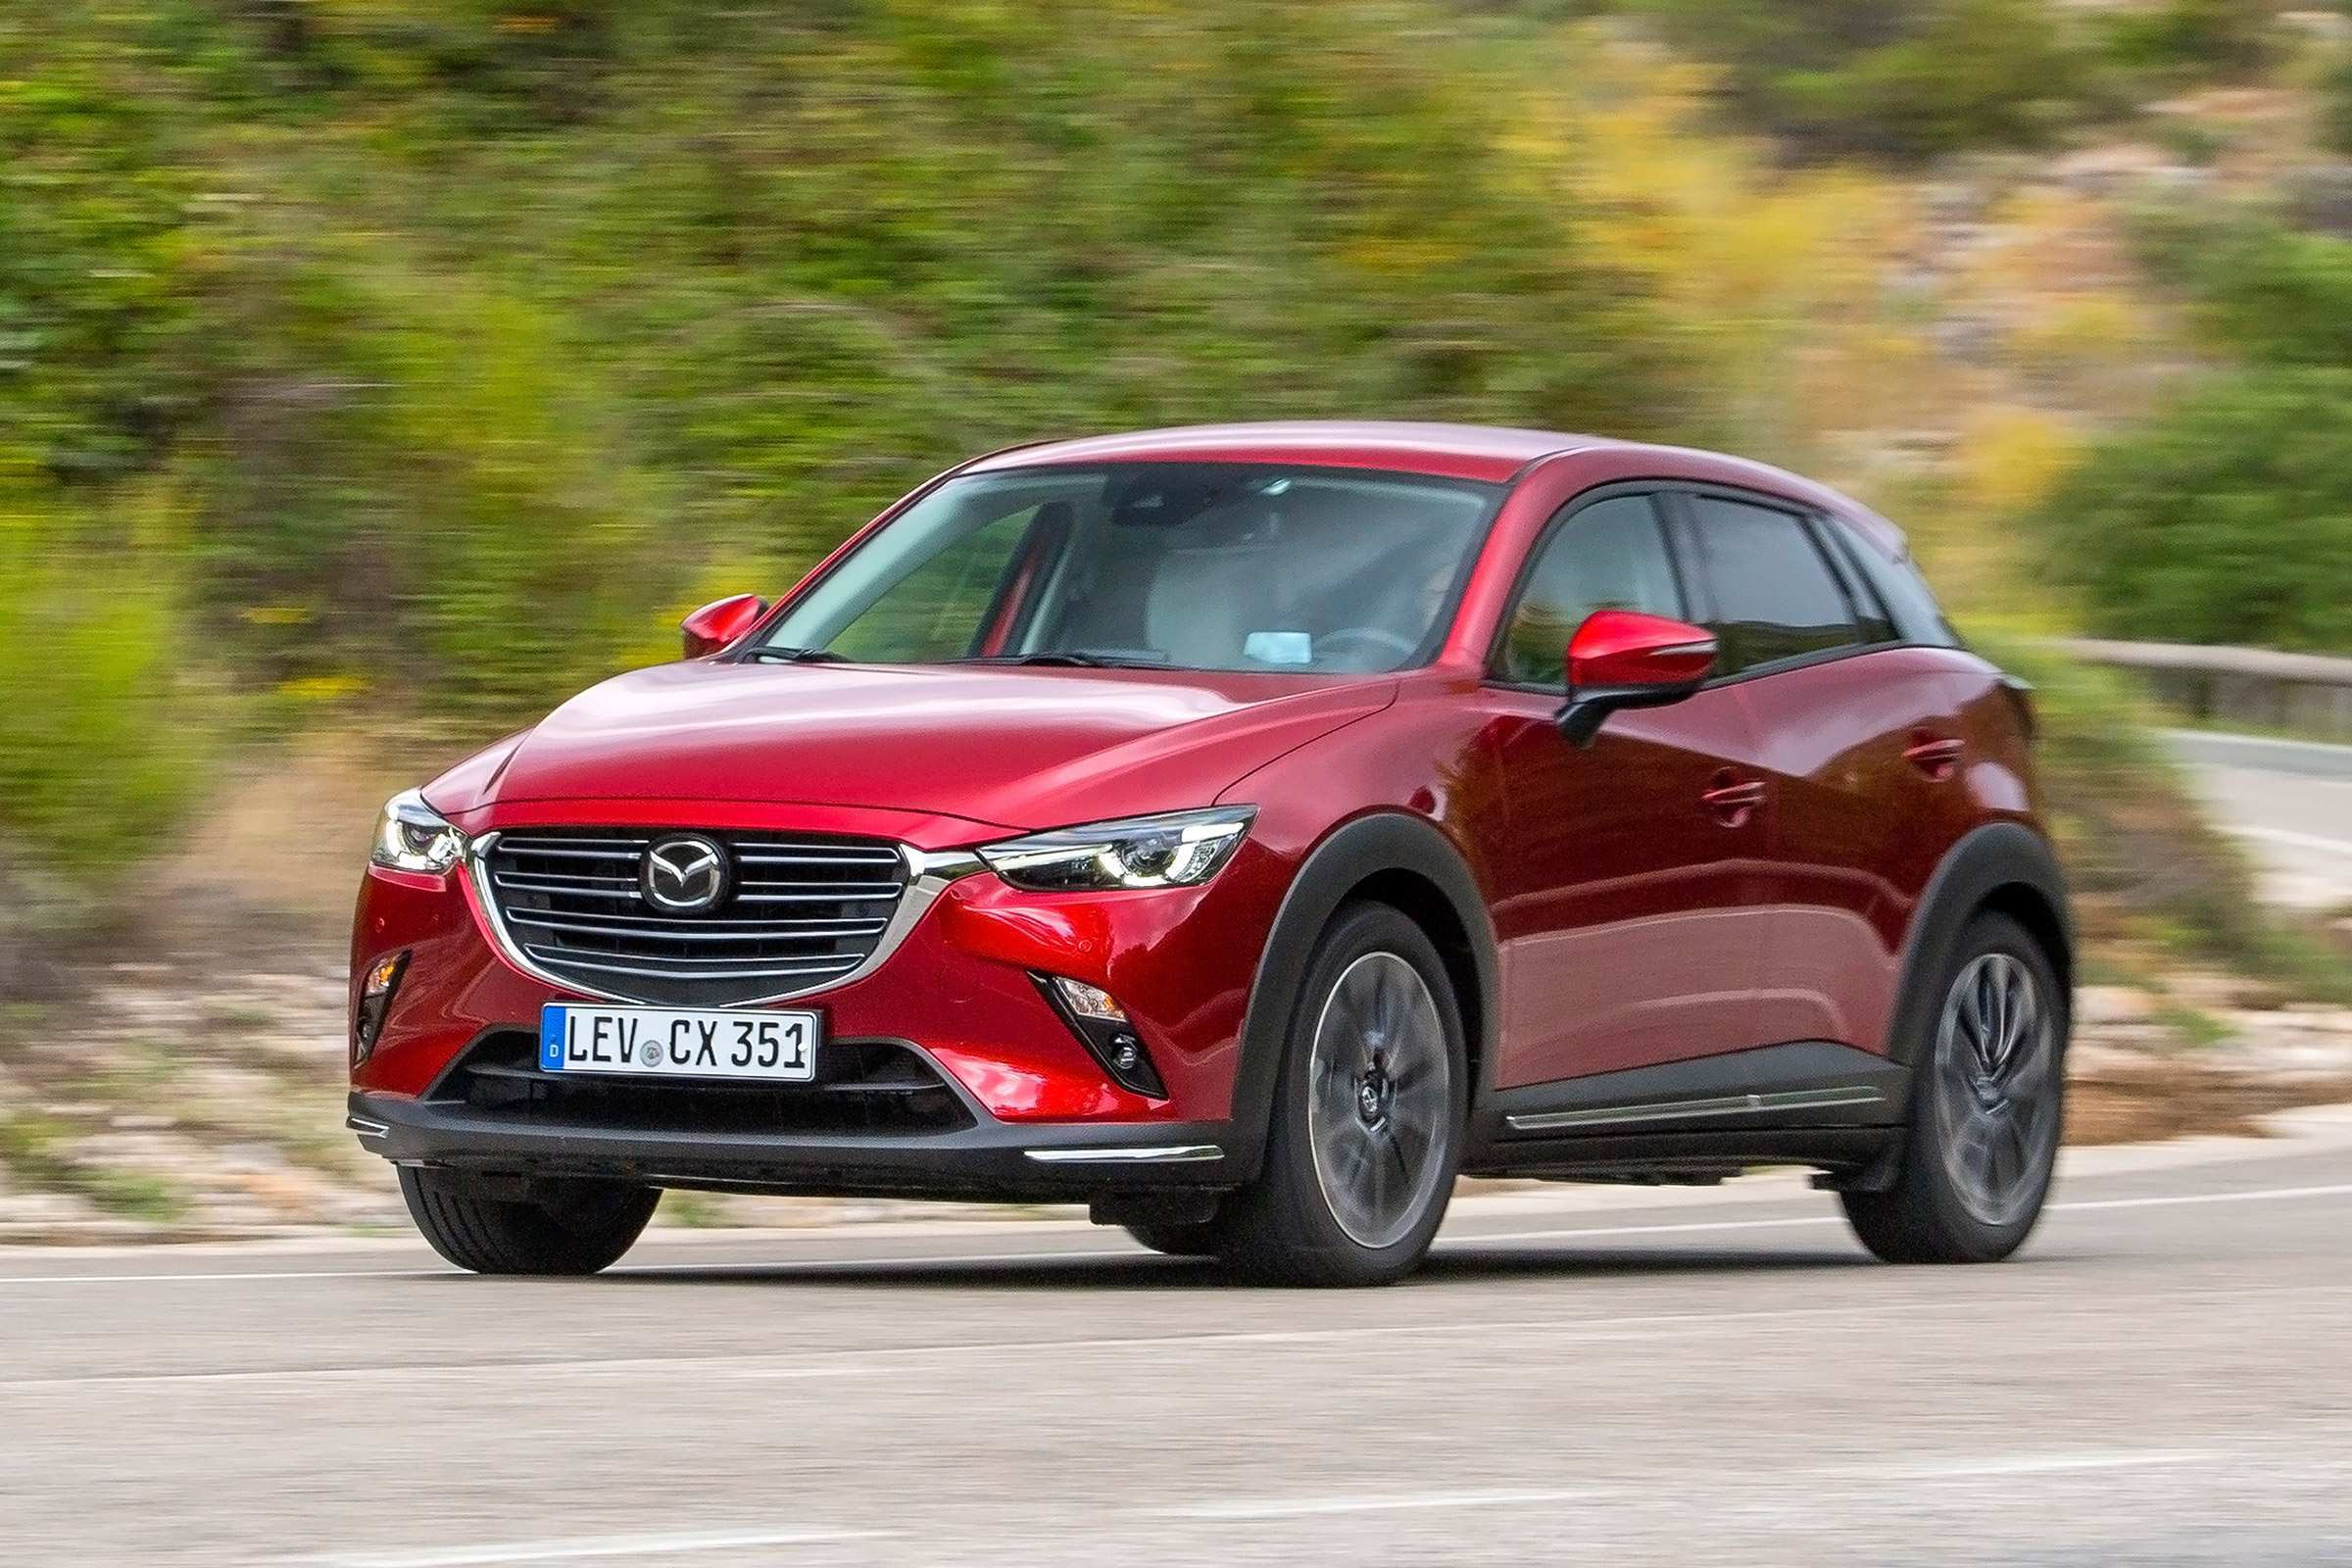 Три сх. Mazda CX 3 2020. Mazda CX-3 2018. Mazda CX-3 2015. Mazda cx3 4 WD.